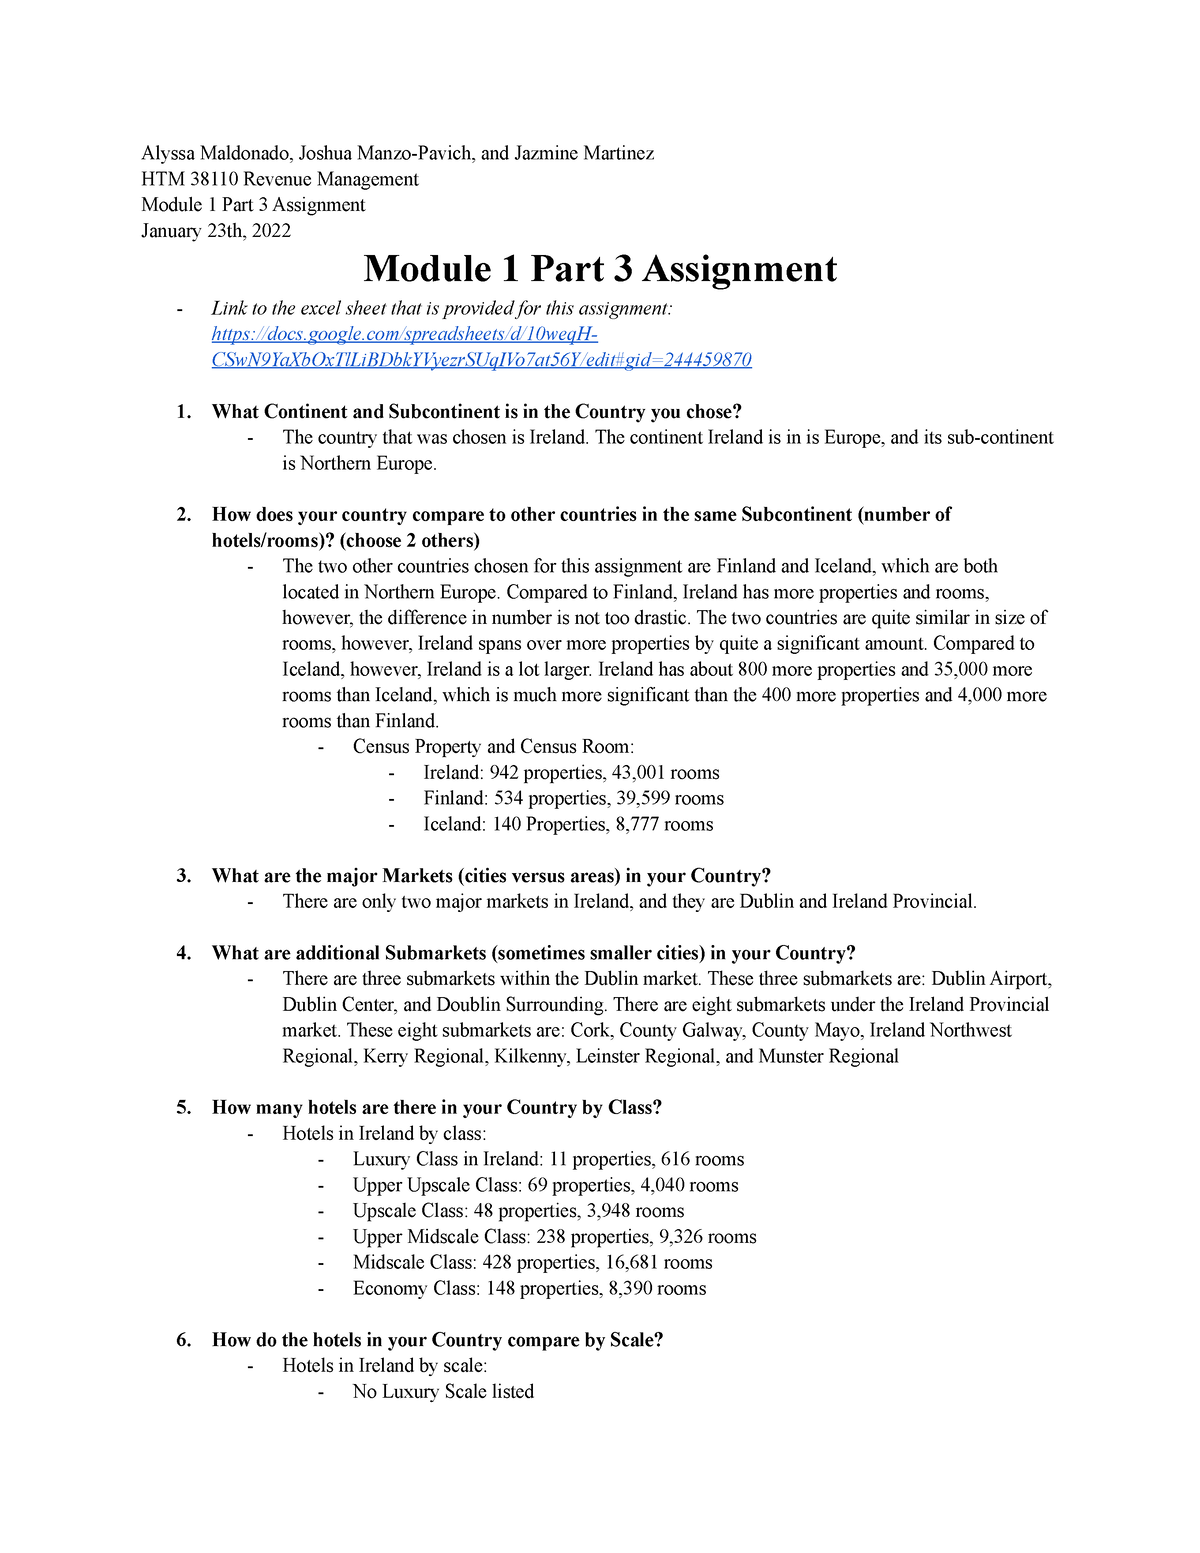 Revenue Management in the Lodging Industry Module 1 Part 3 Assignment ...